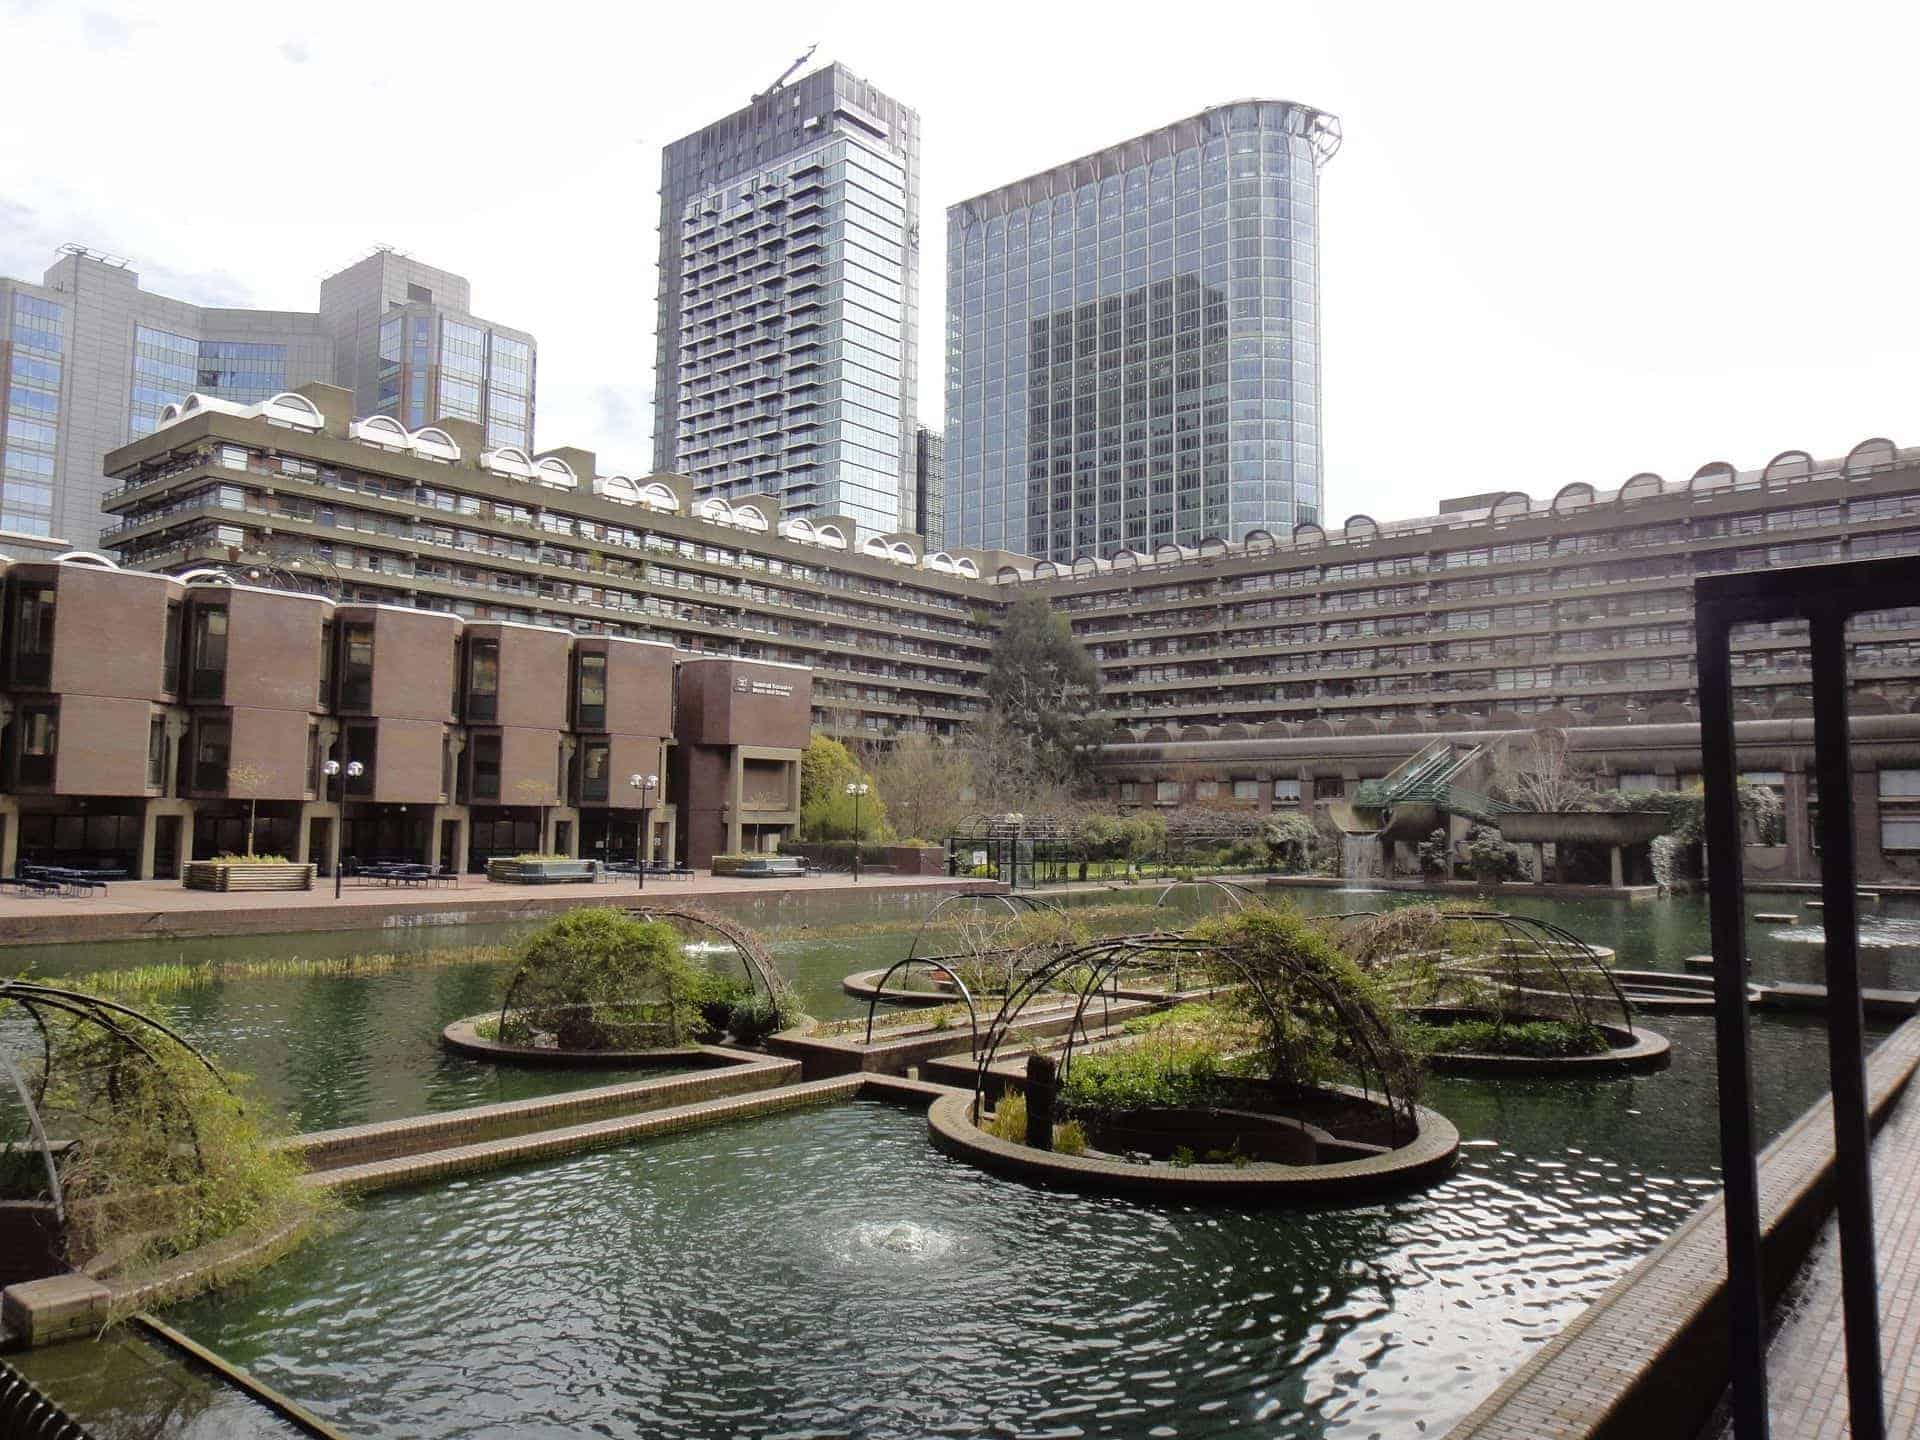 Barbican Centre in UK